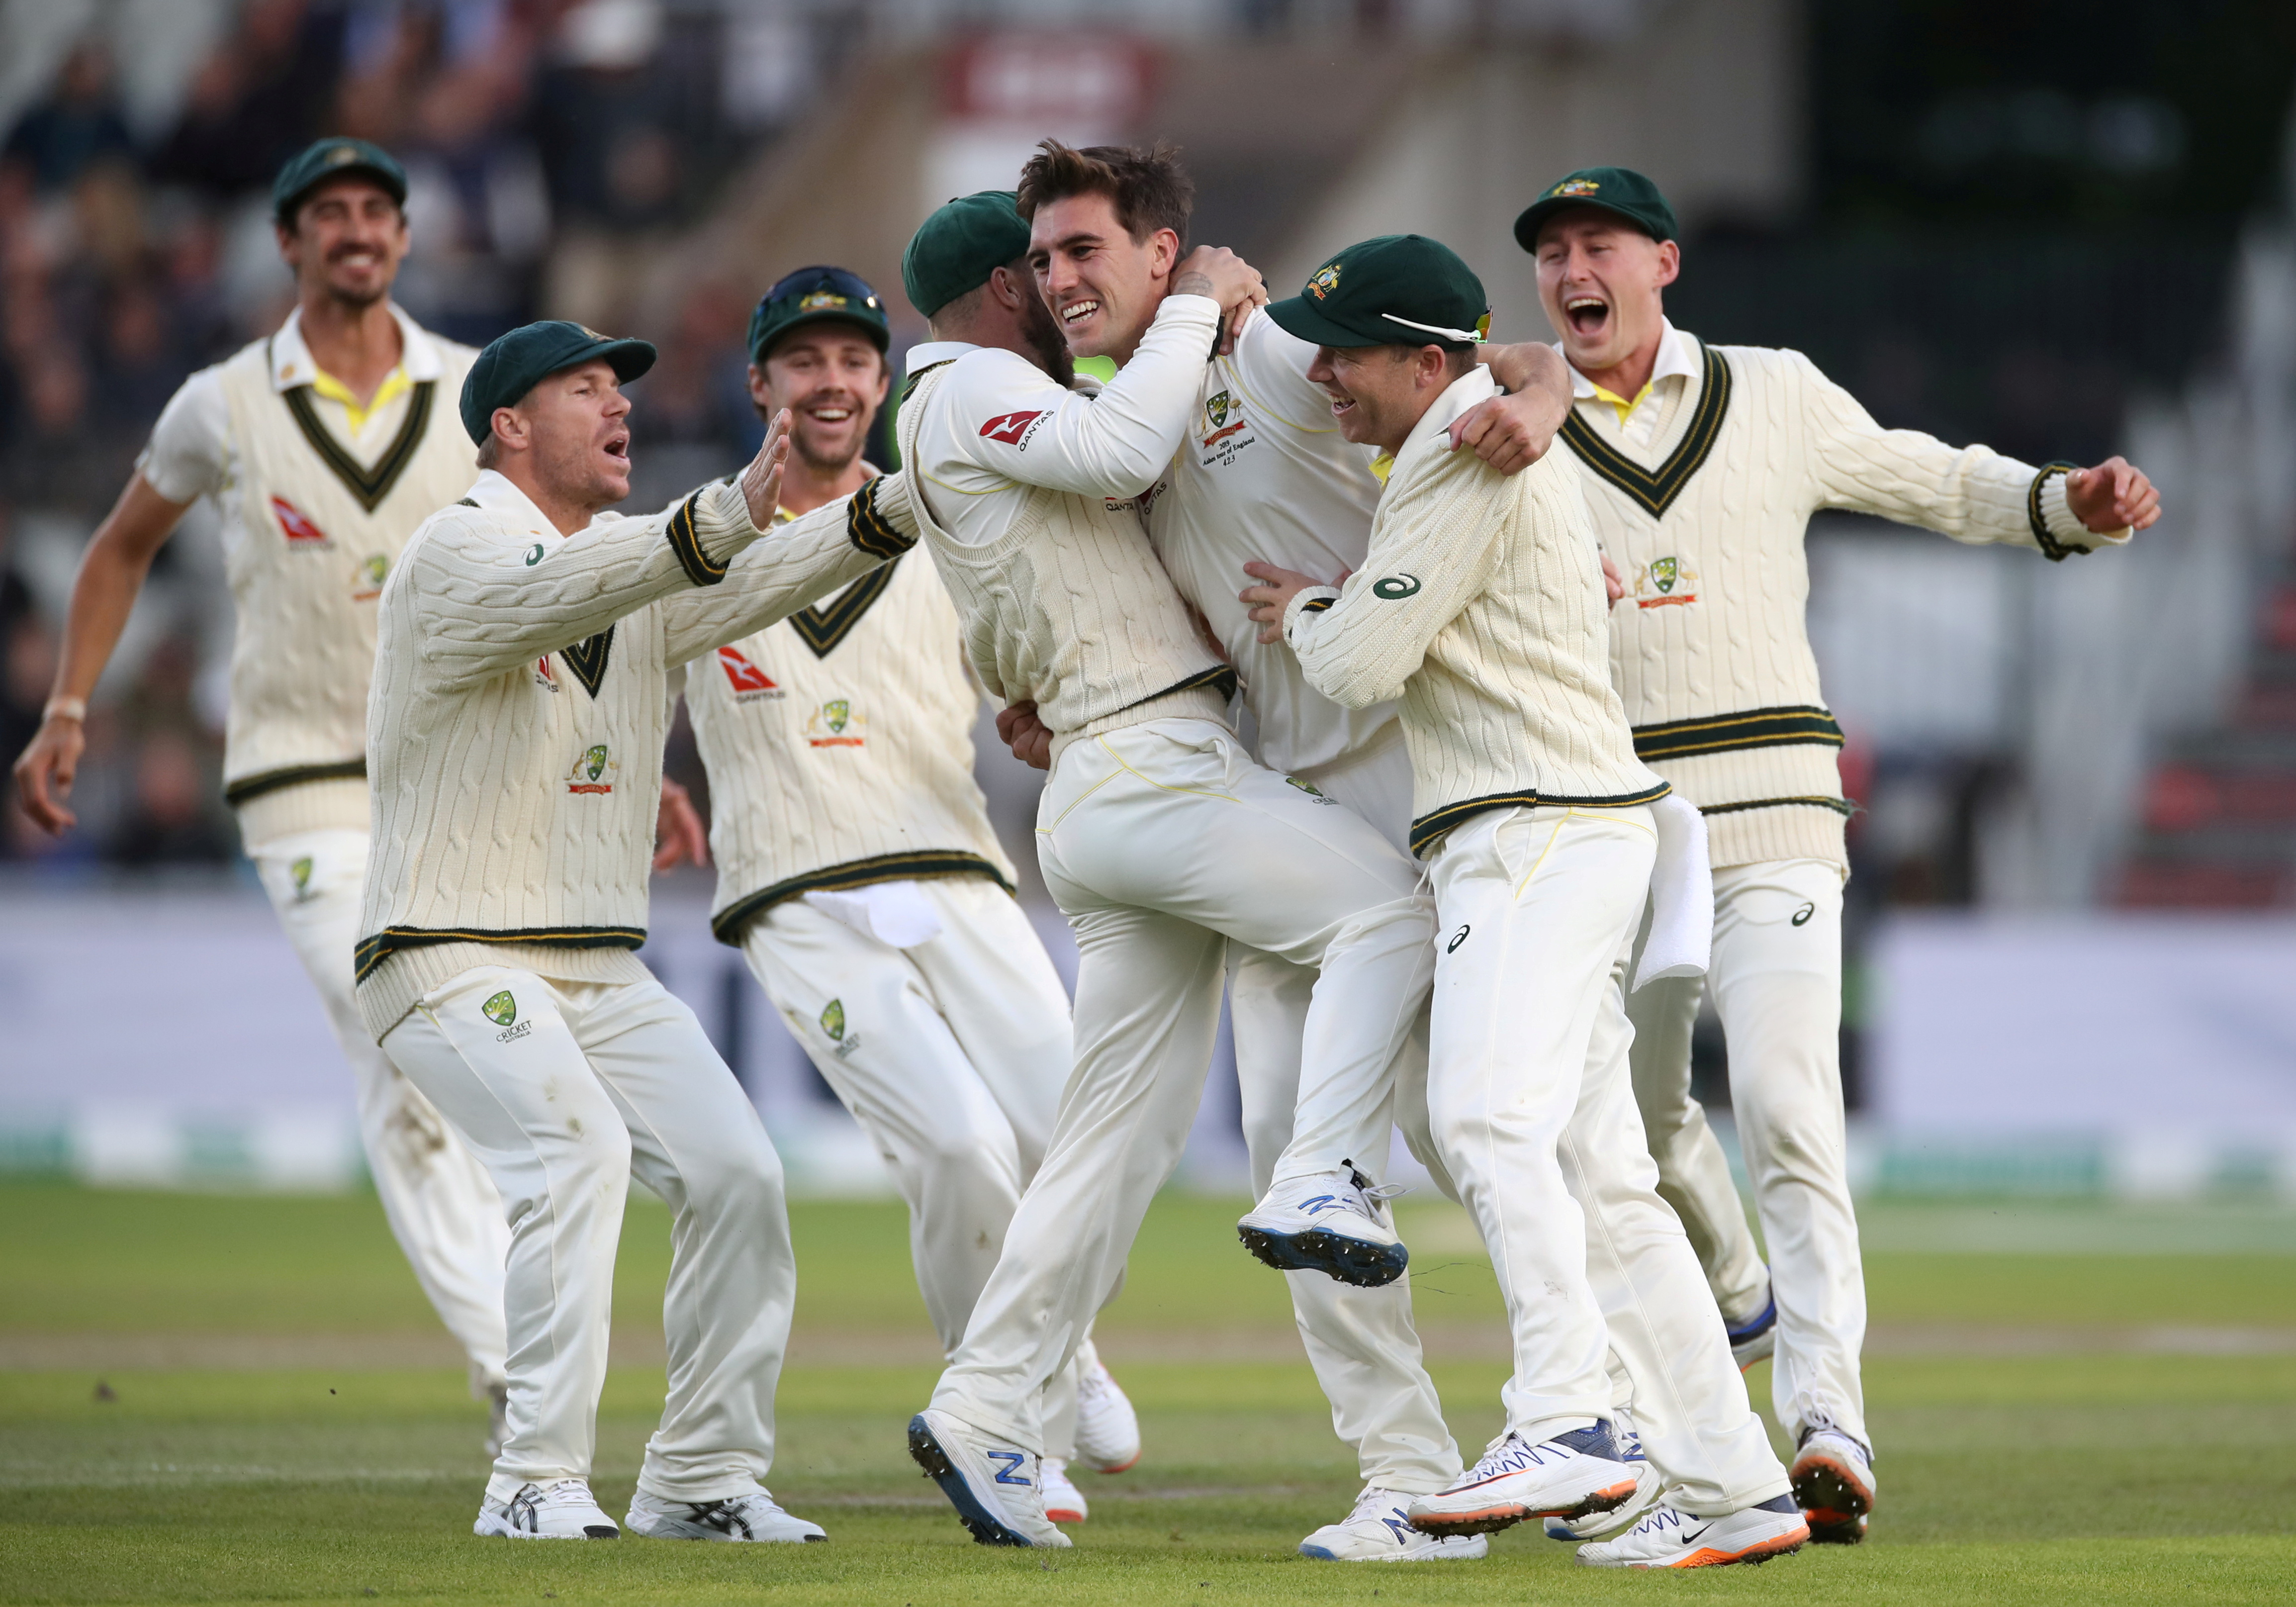 Cricket - Ashes 2019 - Fourth Test - England v Australia - Emirates Old Trafford, Manchester, Britain - September 7, 2019   Australia's Pat Cummins celebrates taking the wicket of England's Joe Root with team mates.  Action Images via Reuters/Carl Recine